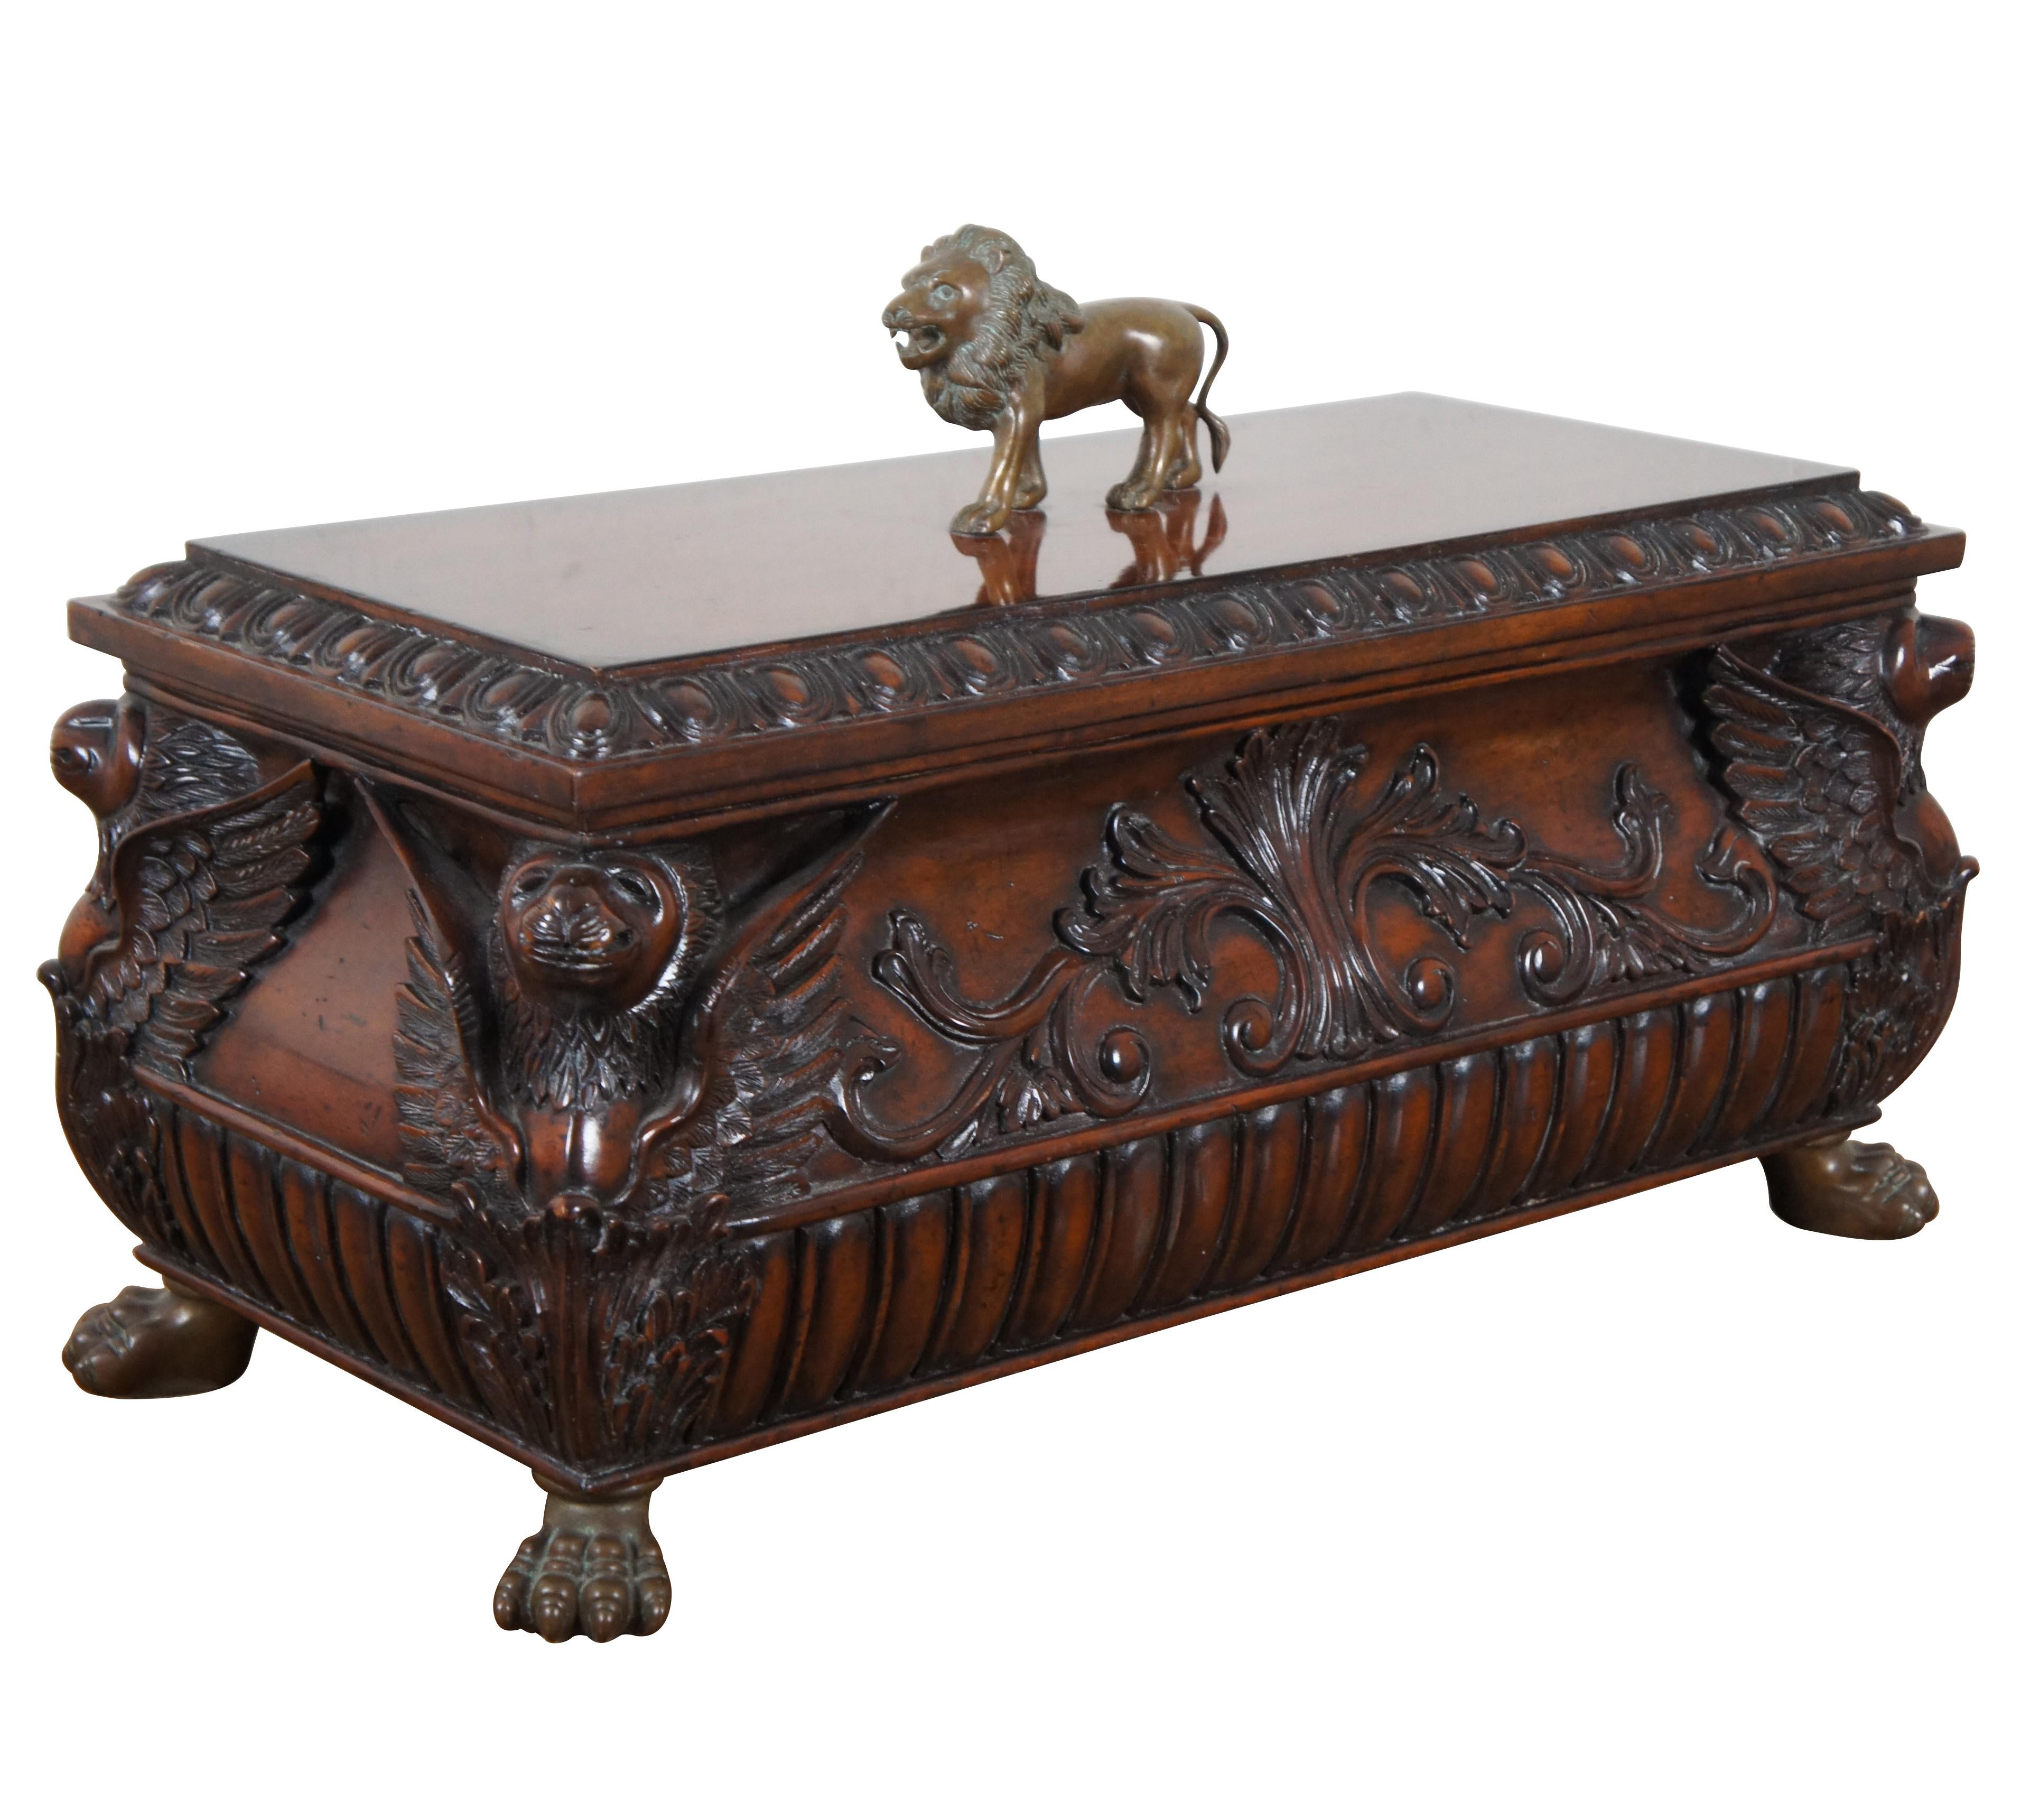 Vintage Maitland Smith mahogany box or chest carved with Neoclassical / Egyptian Revival foliate details and winged lion corners, supported on brass paw feet with a brass walking lion finial on the lid.